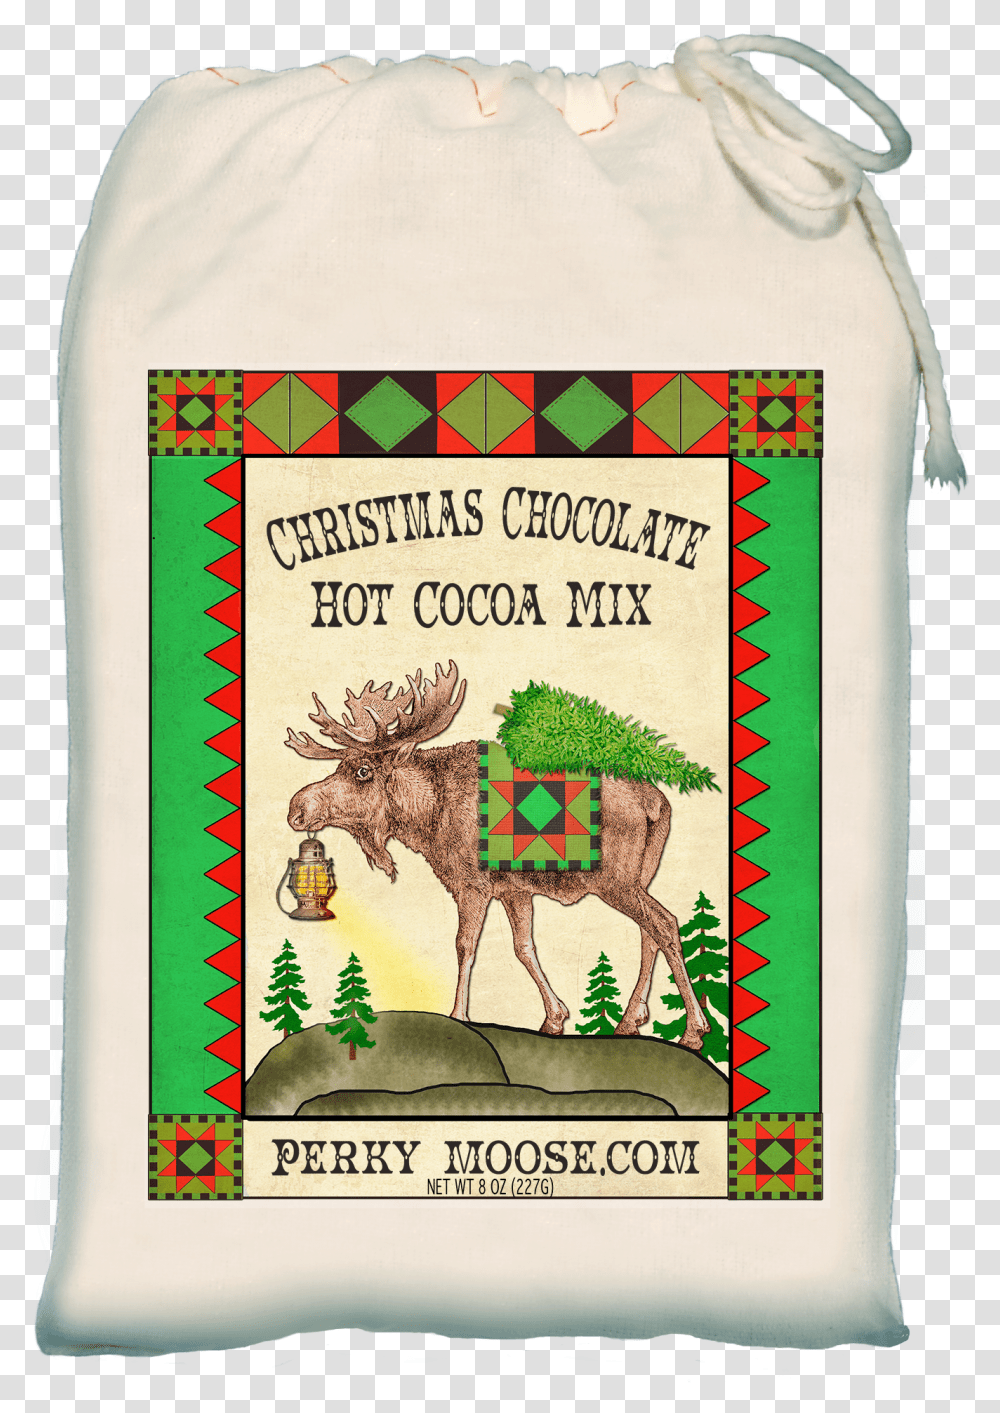 Christmas Chocolate - Perky Moose Hot Cocoa, Alcohol, Beverage, Liquor, Bottle Transparent Png